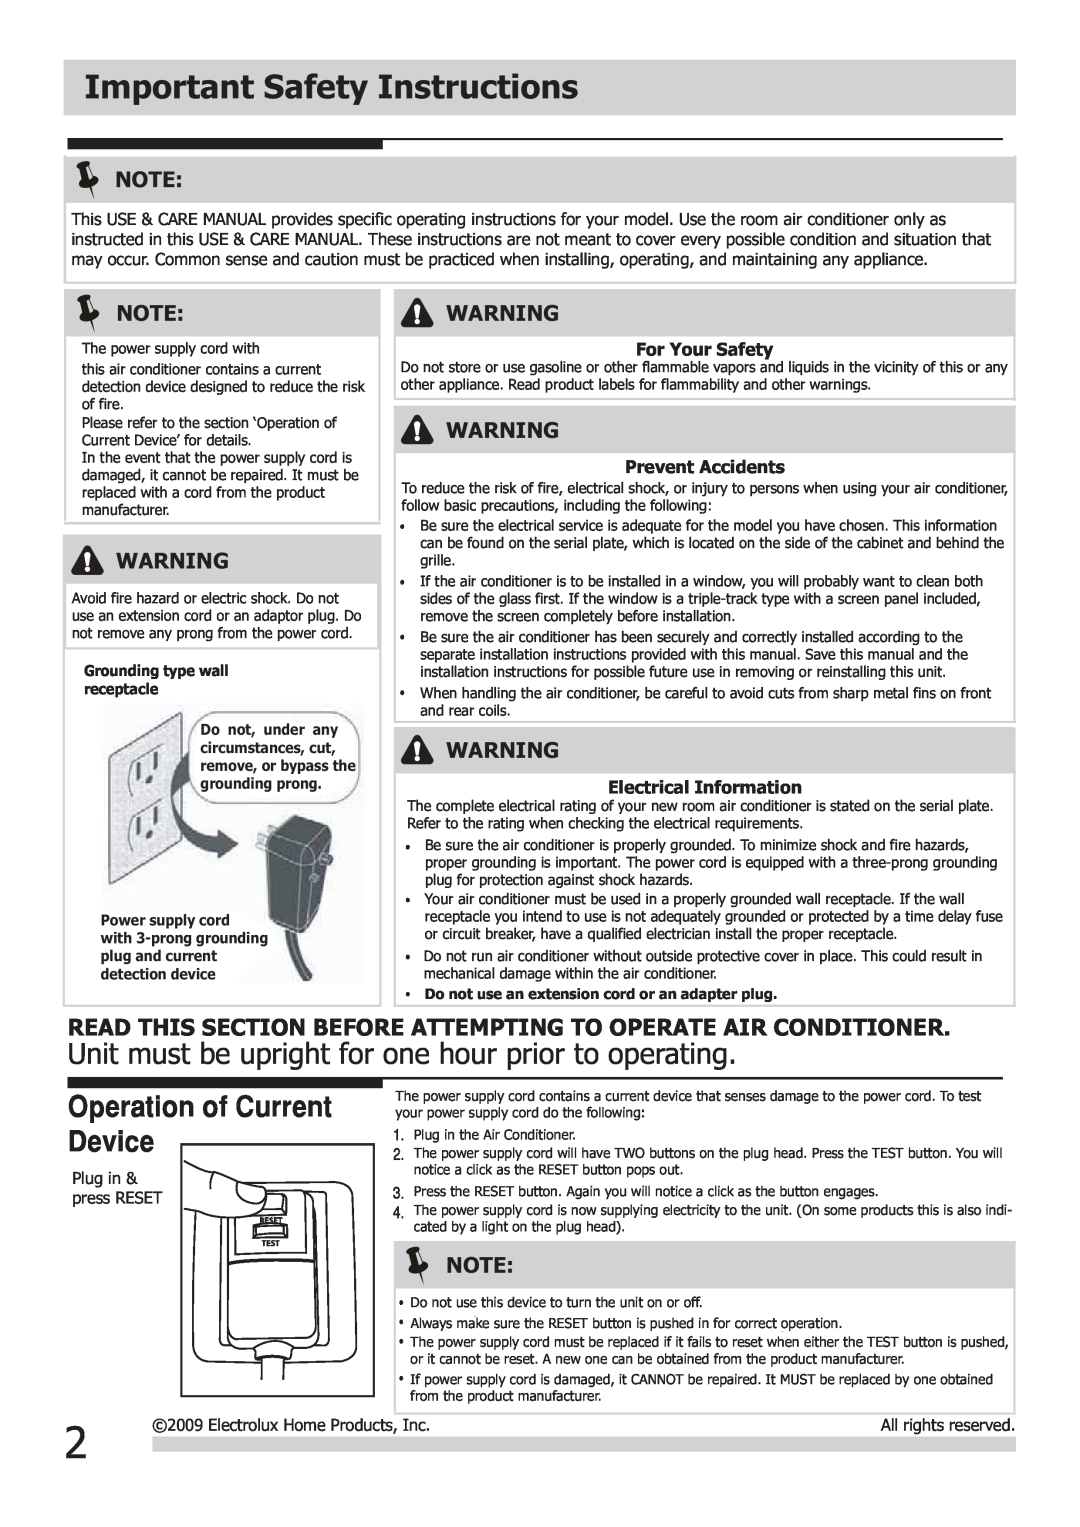 Frigidaire FRA103BT1 Important Safety Instructions, For Your Safety, Prevent Accidents, Electrical Information 